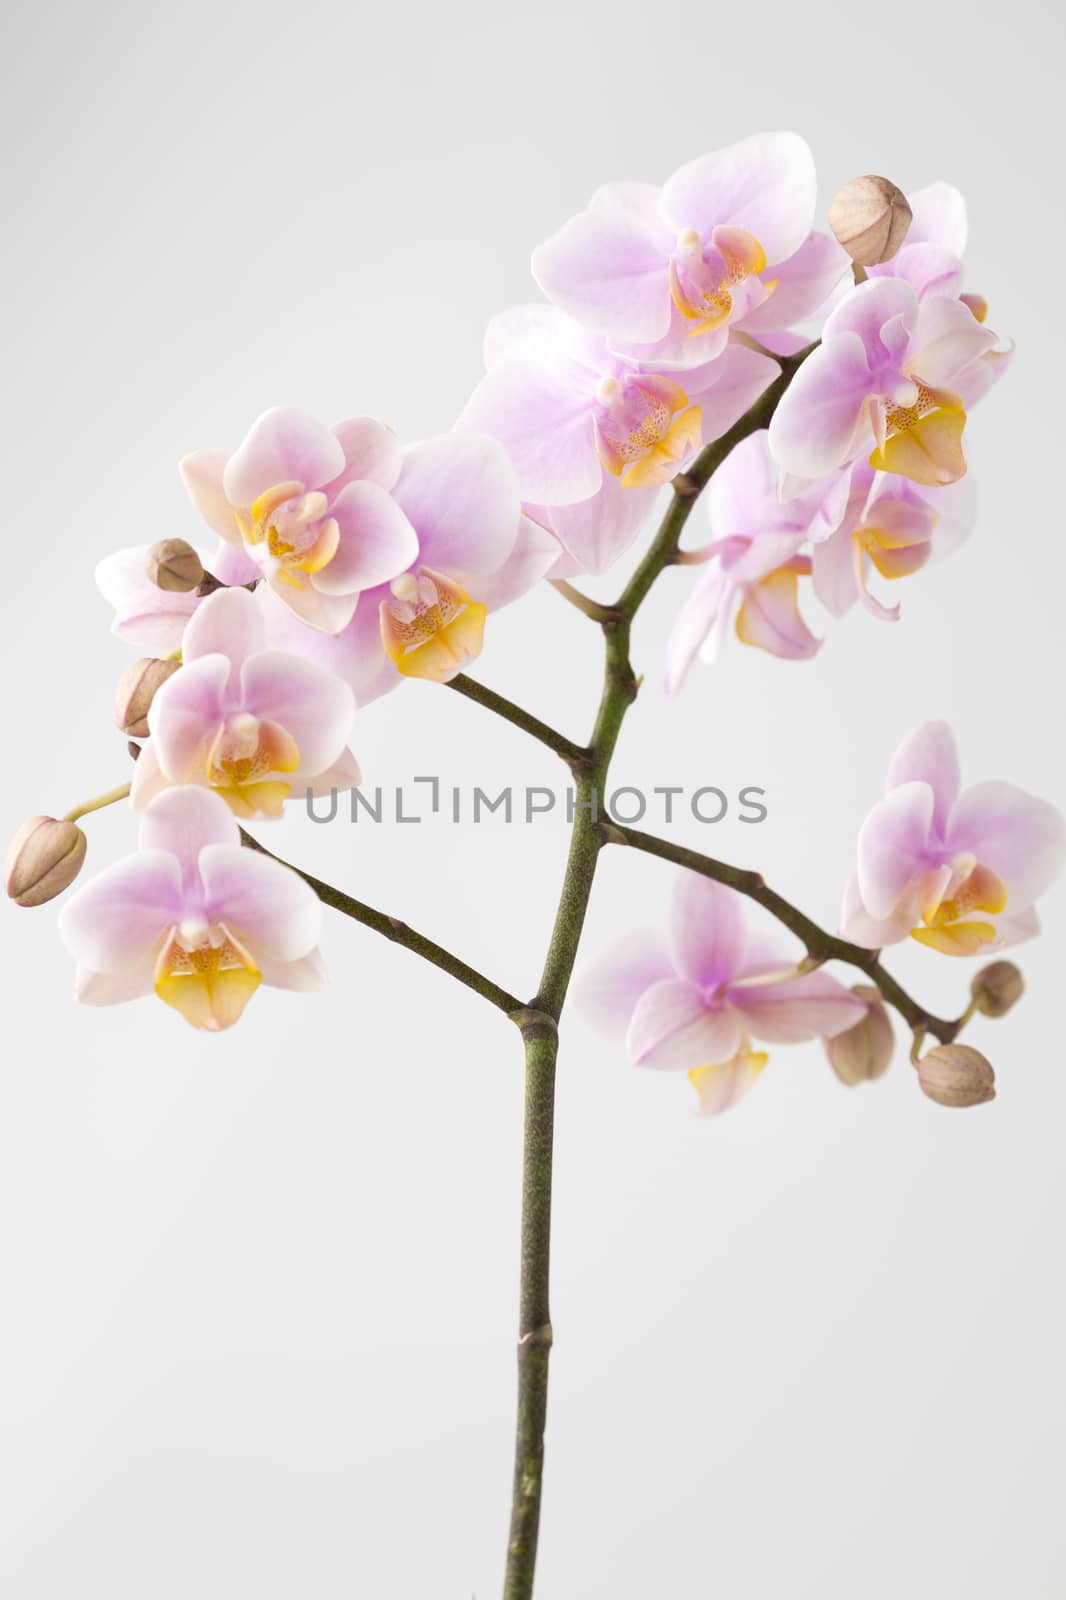 Orchid on a wooden surface. Studio photography.